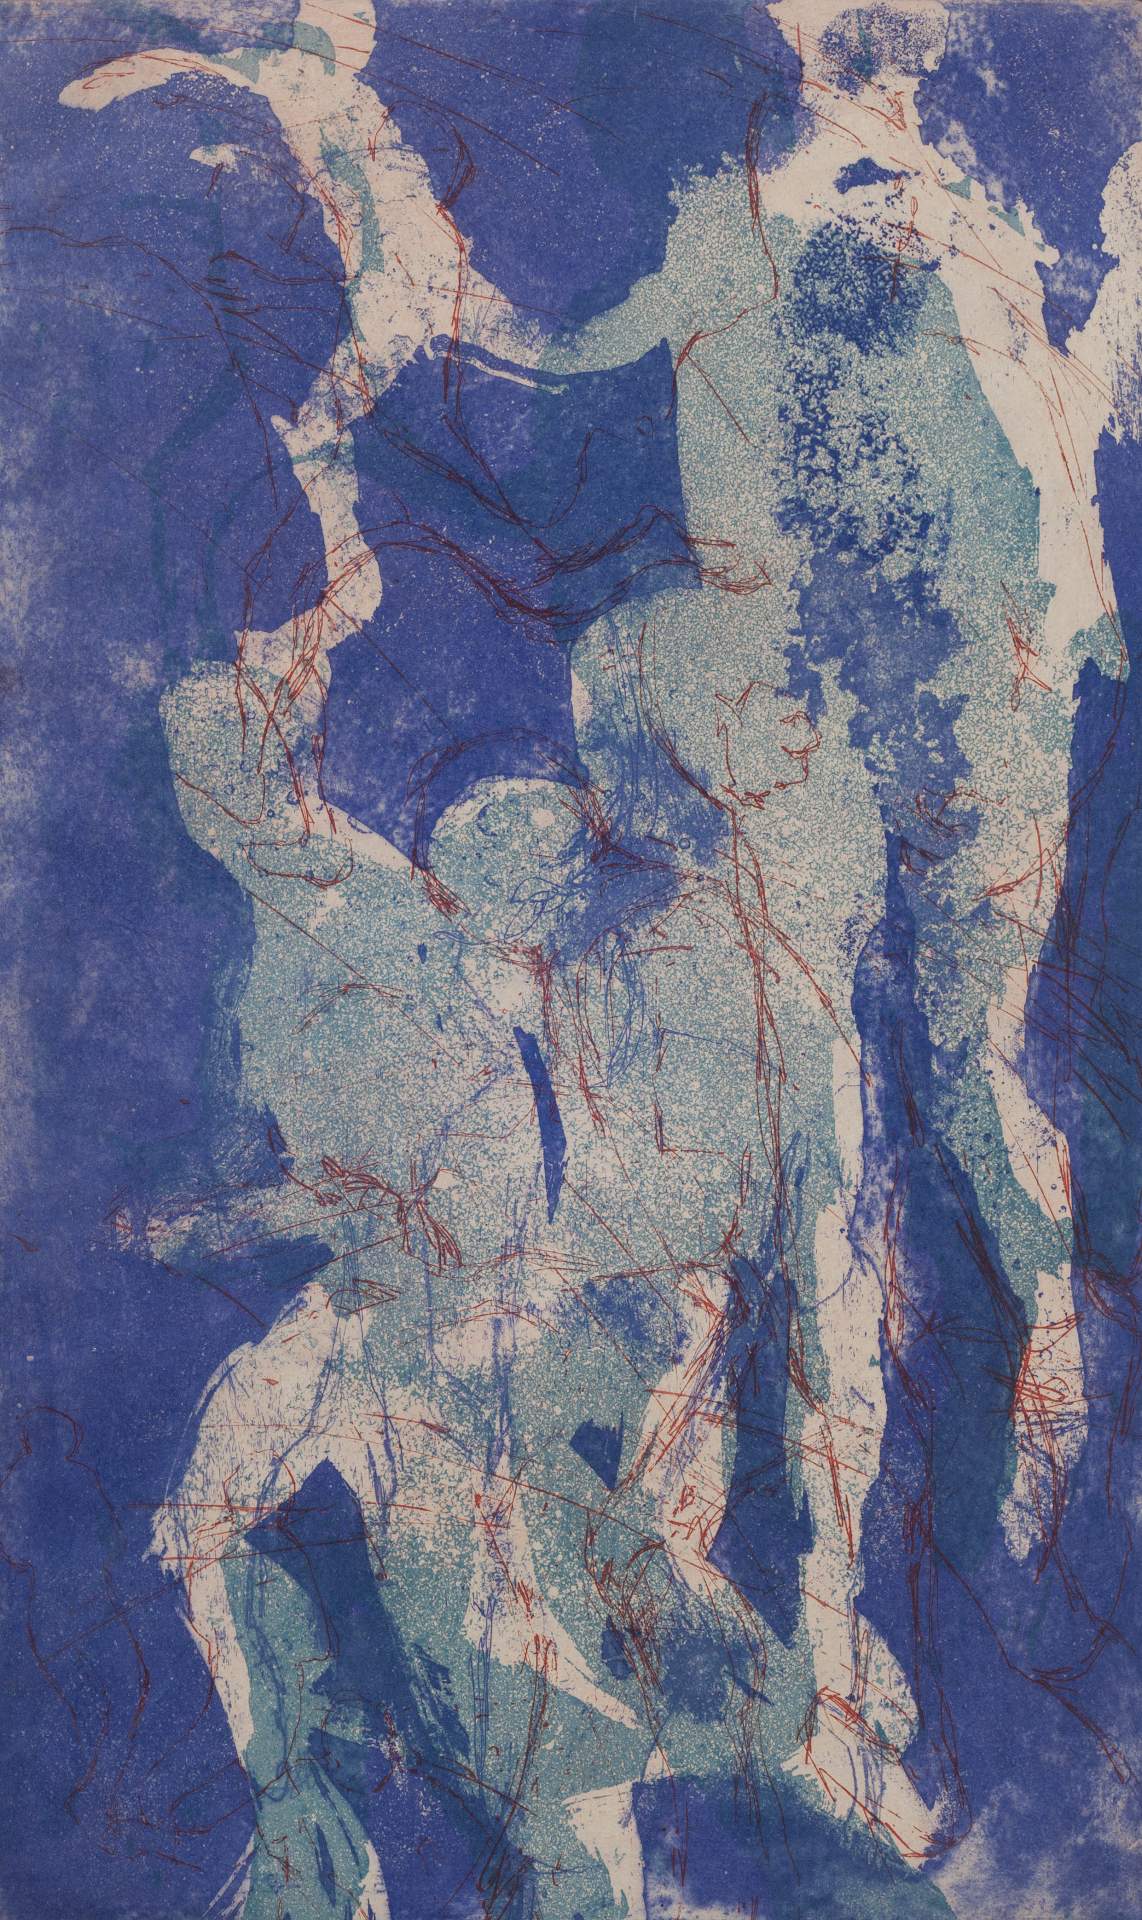 Untitled (figures in blue, aqua, pink, red line)